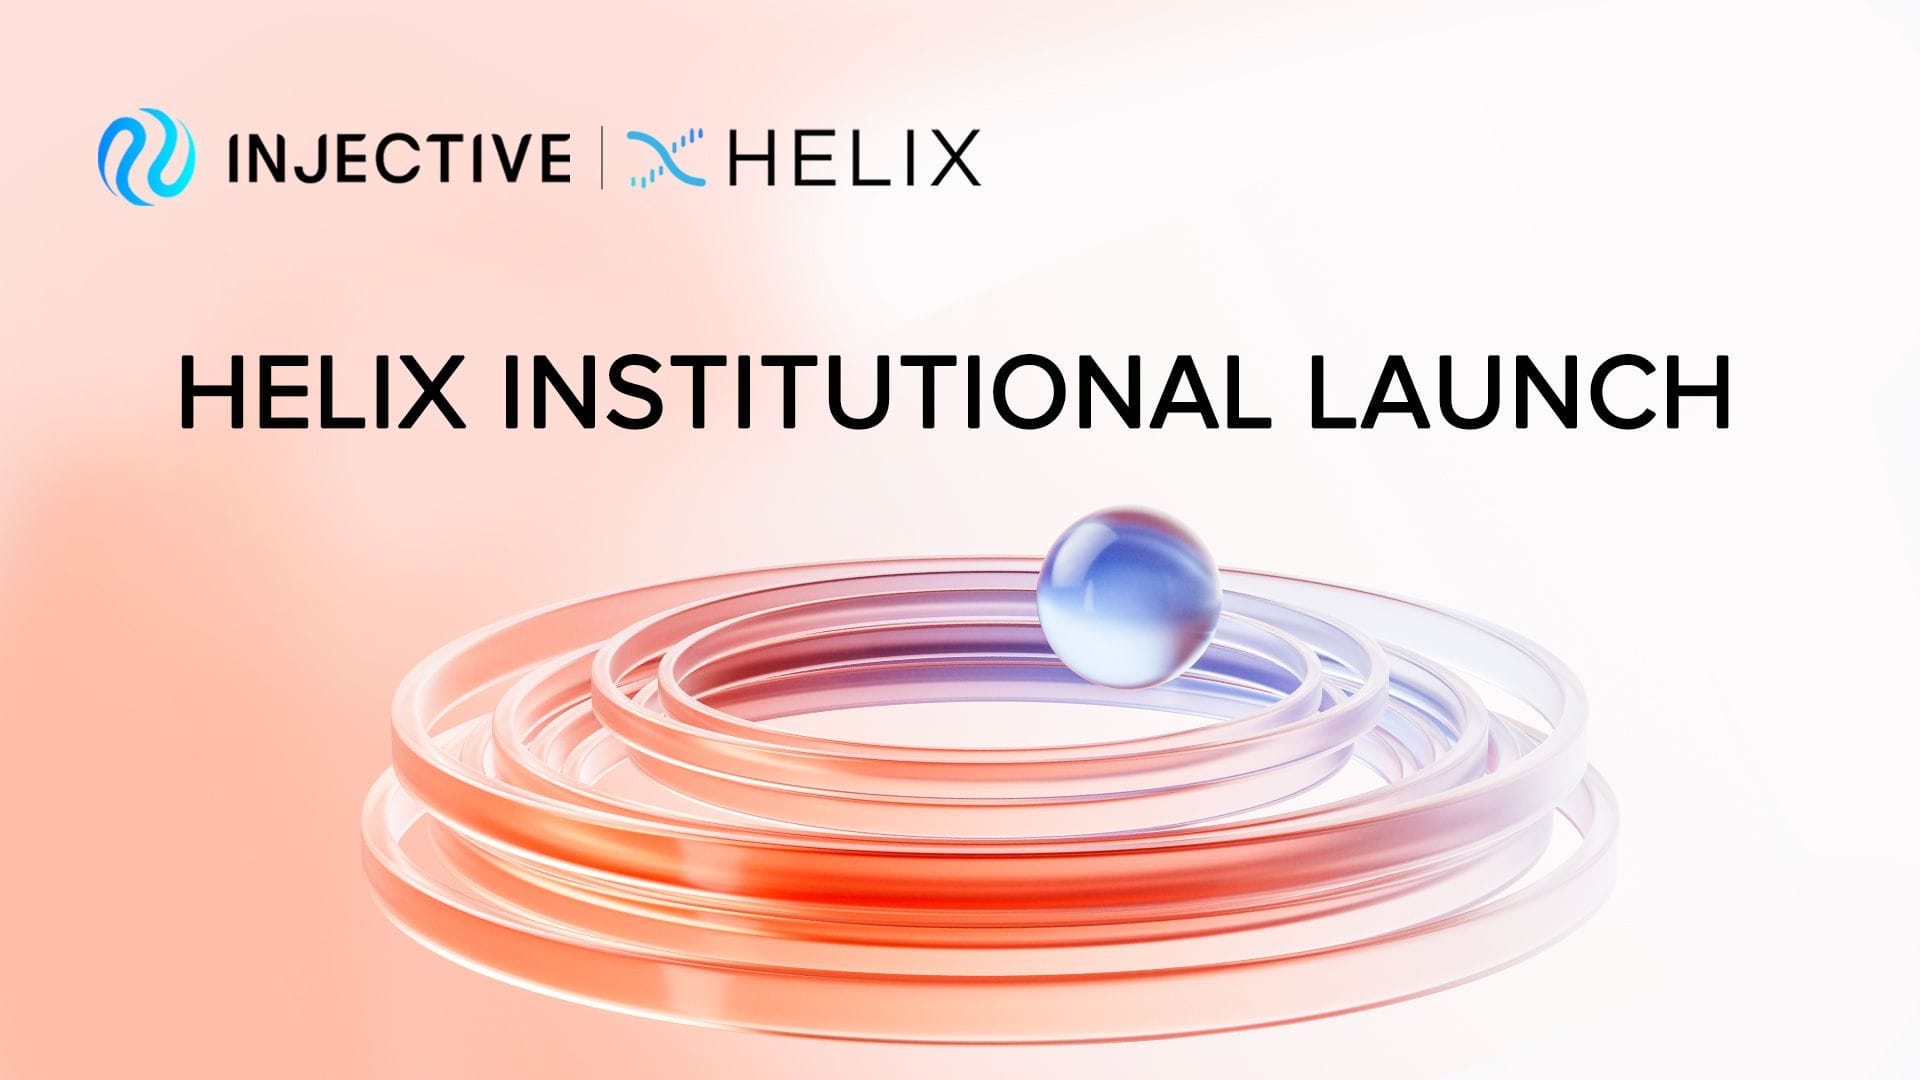 Helix Institutional Launch